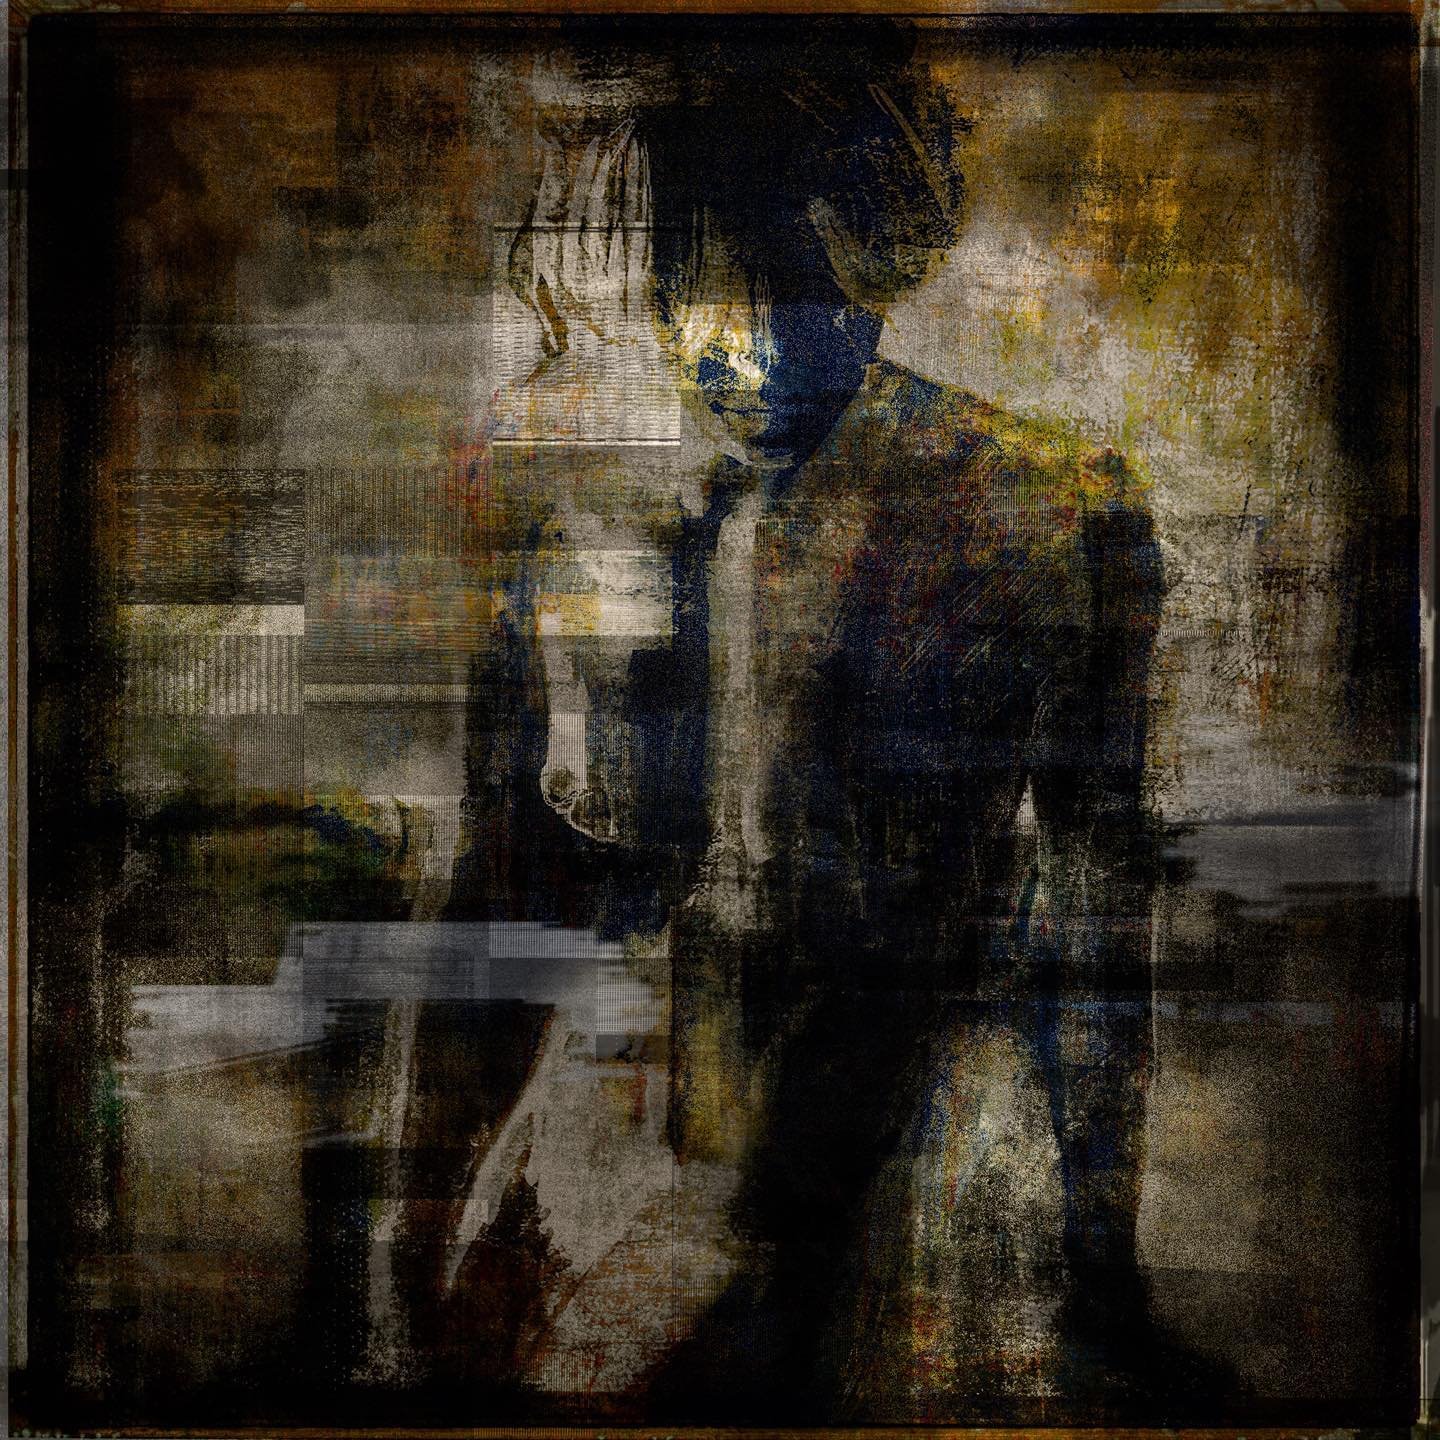 Seated Figure no. 3

Prints available
DM me for information 
#regnierstudio #intentionalcameramovement&nbsp;#icm #abstractphotography&nbsp;#abstract #fineartphotography&nbsp;#impressionism #abstractart&nbsp;#impressionistphotography #icmphotography&n